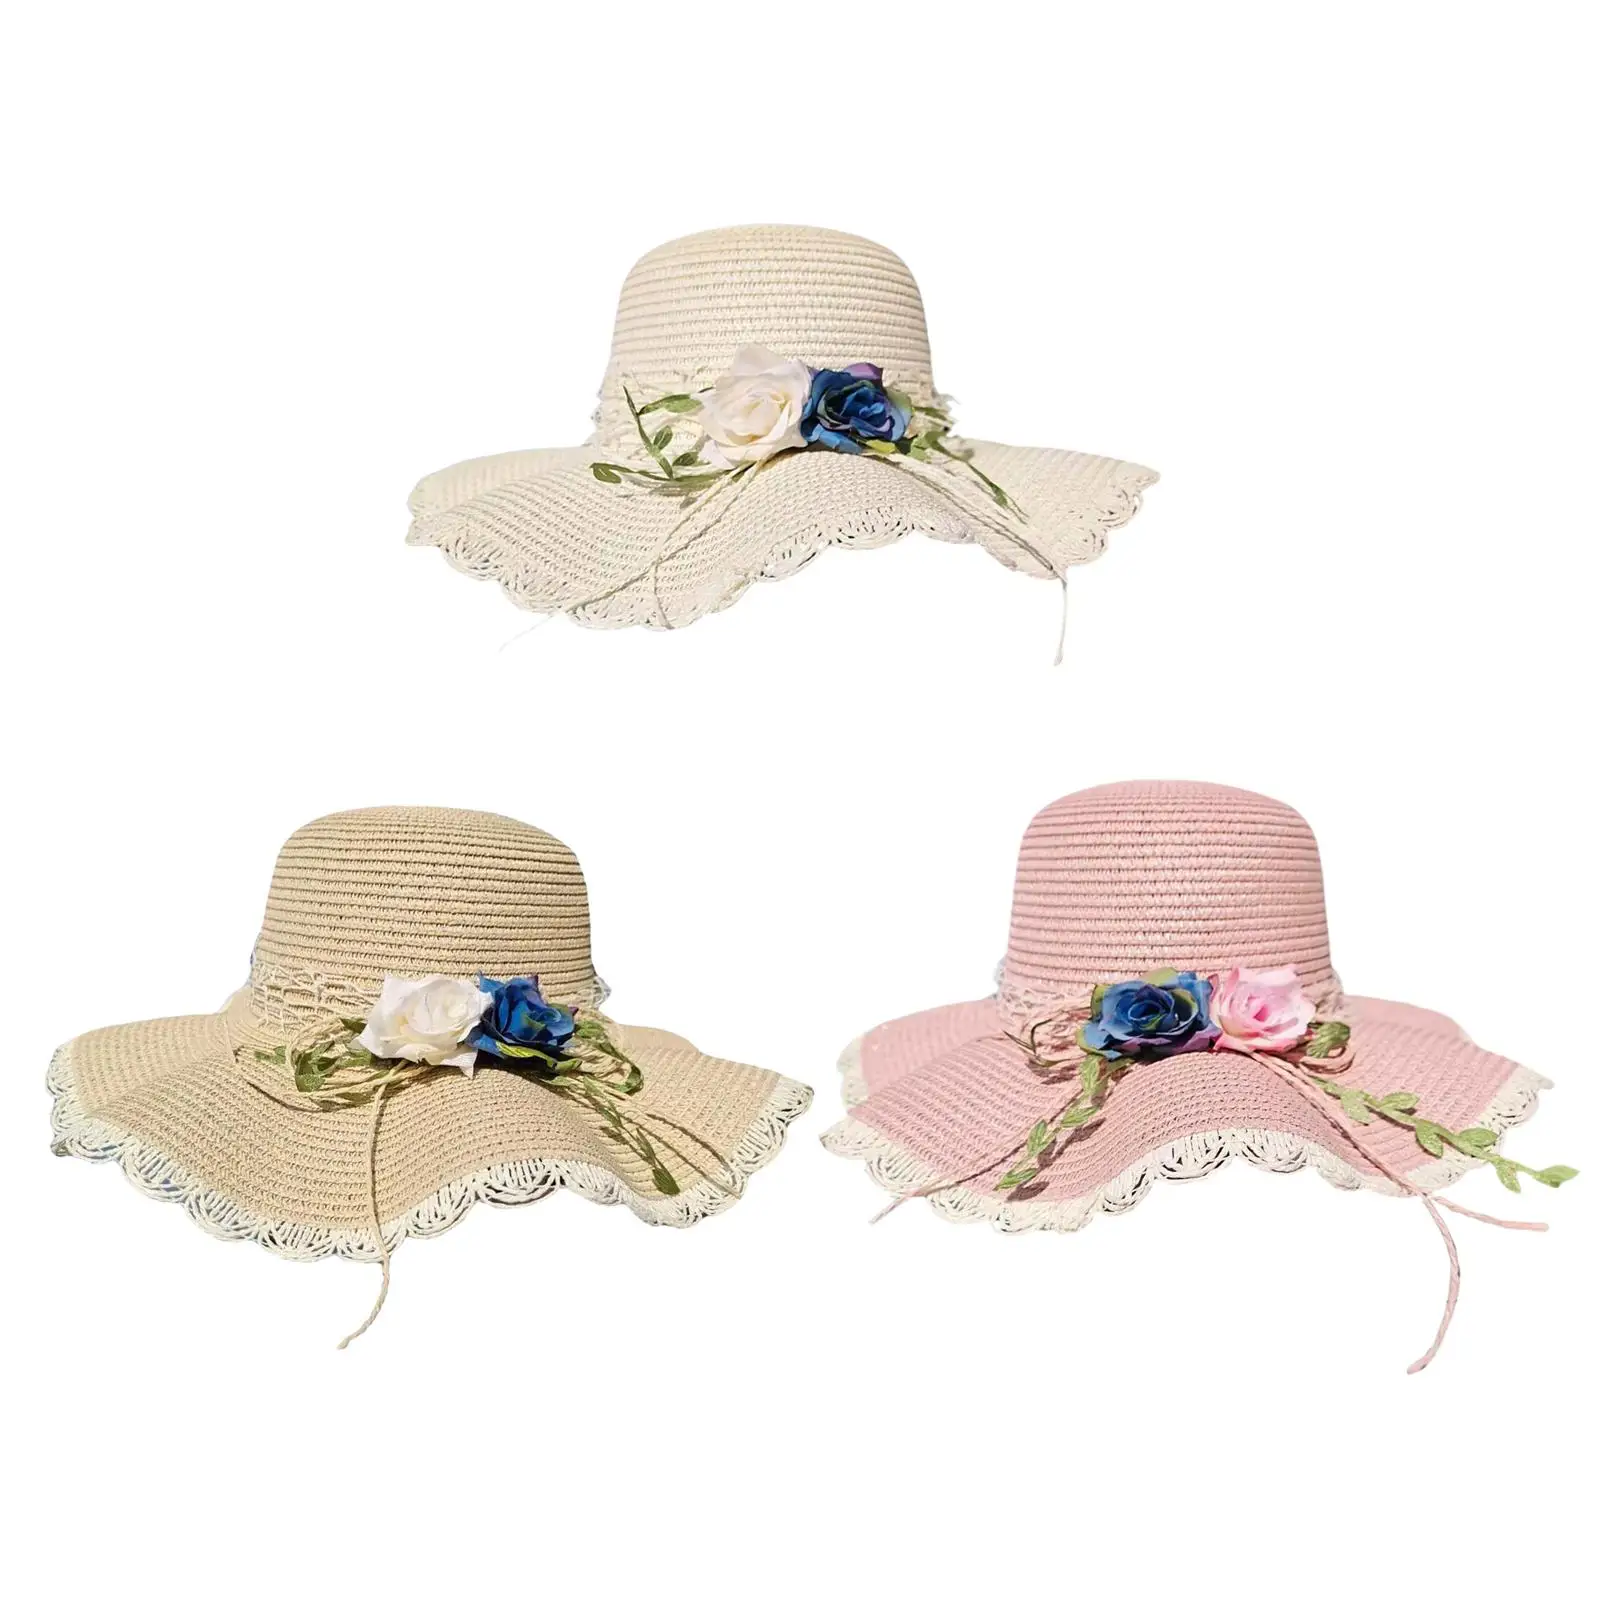 Straw Hats Women Wide Brim with Rose Embellishments Portable Women Hats Summer Sun Protection for Short Trips Festivals Gift